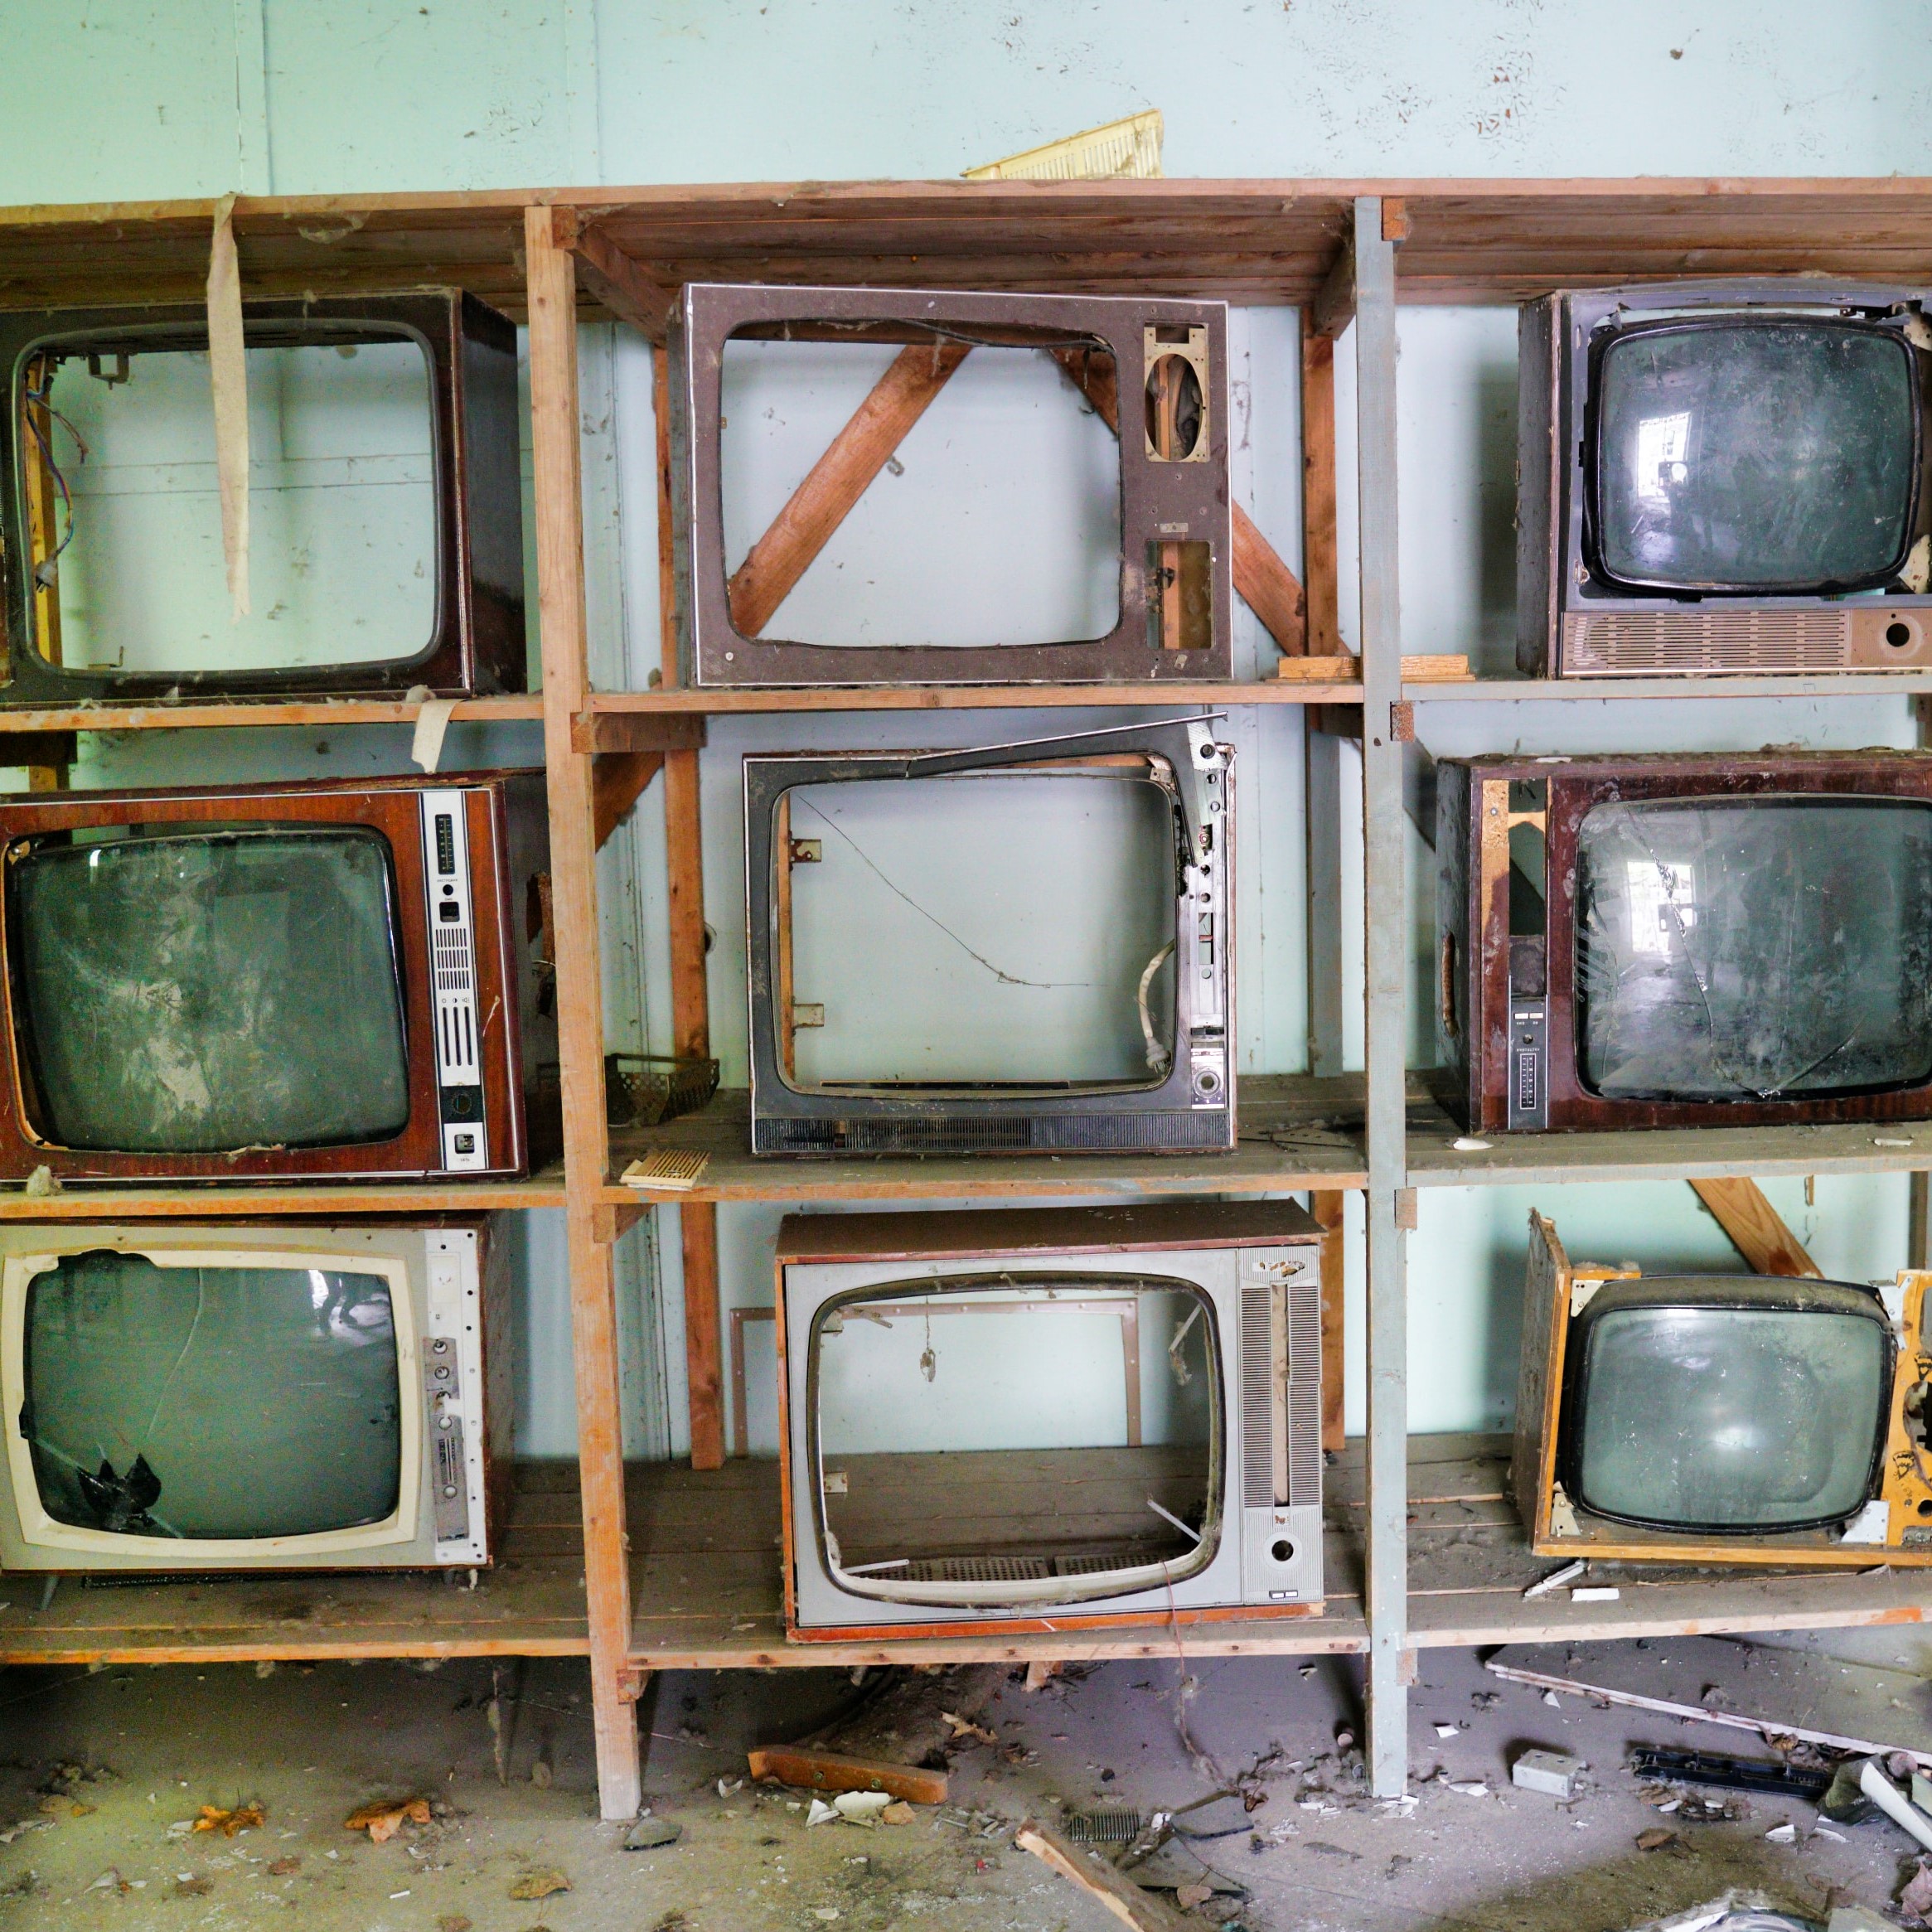 old tvs on a shelving unit with their screens smashed out